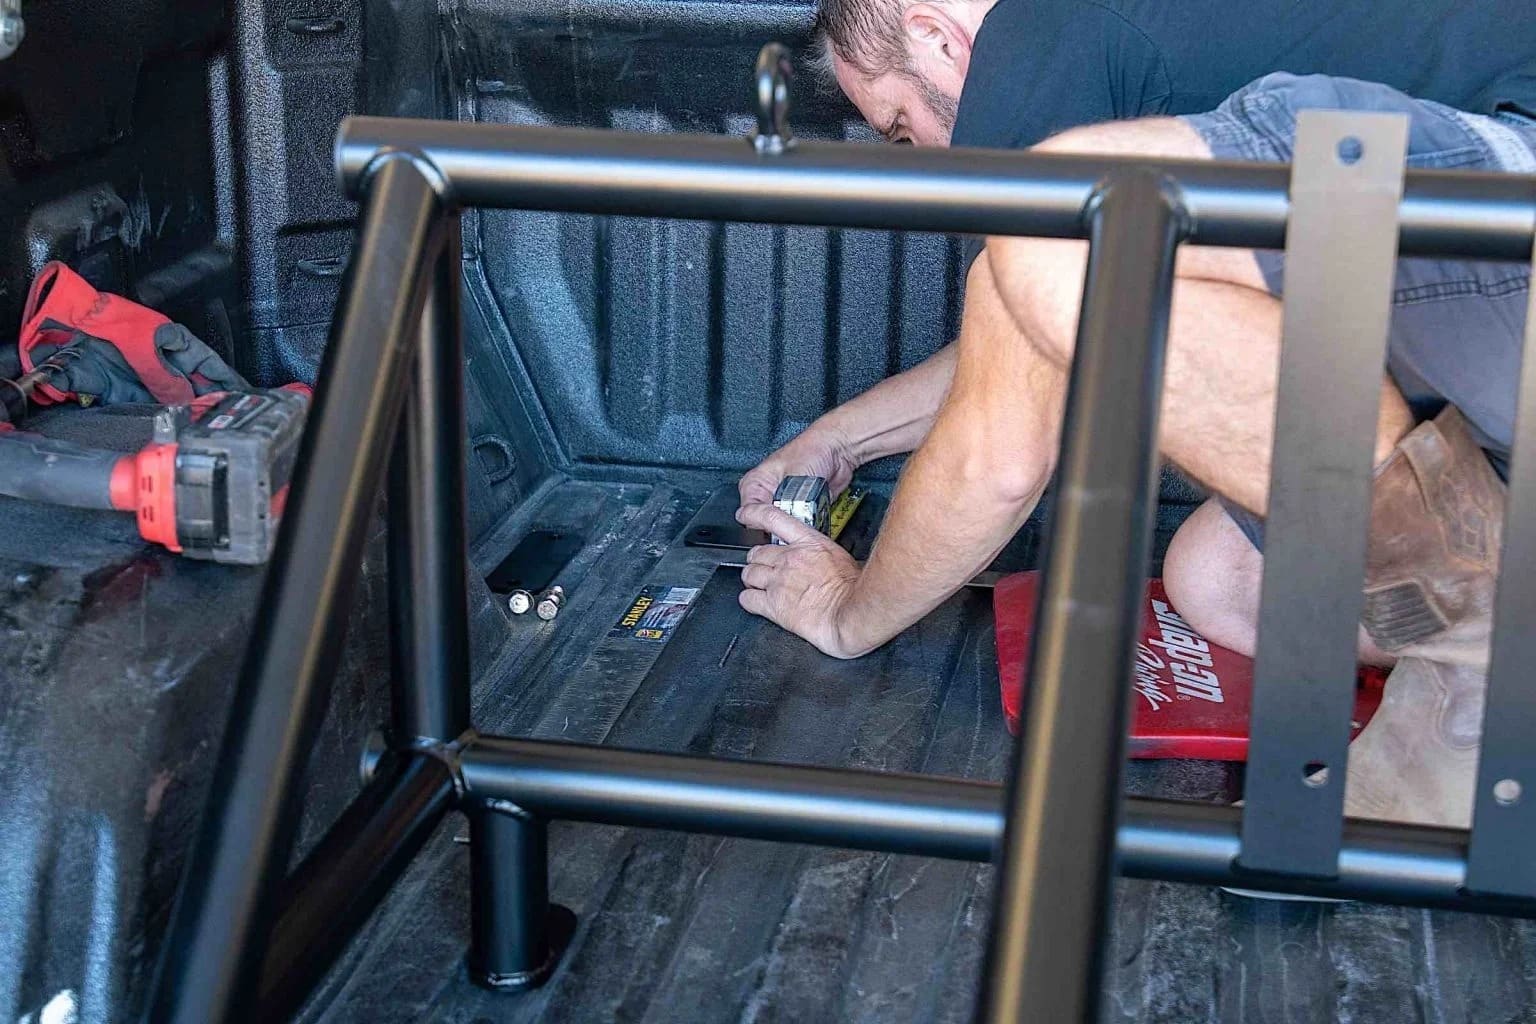 Installing a tire rack into a truck bed.